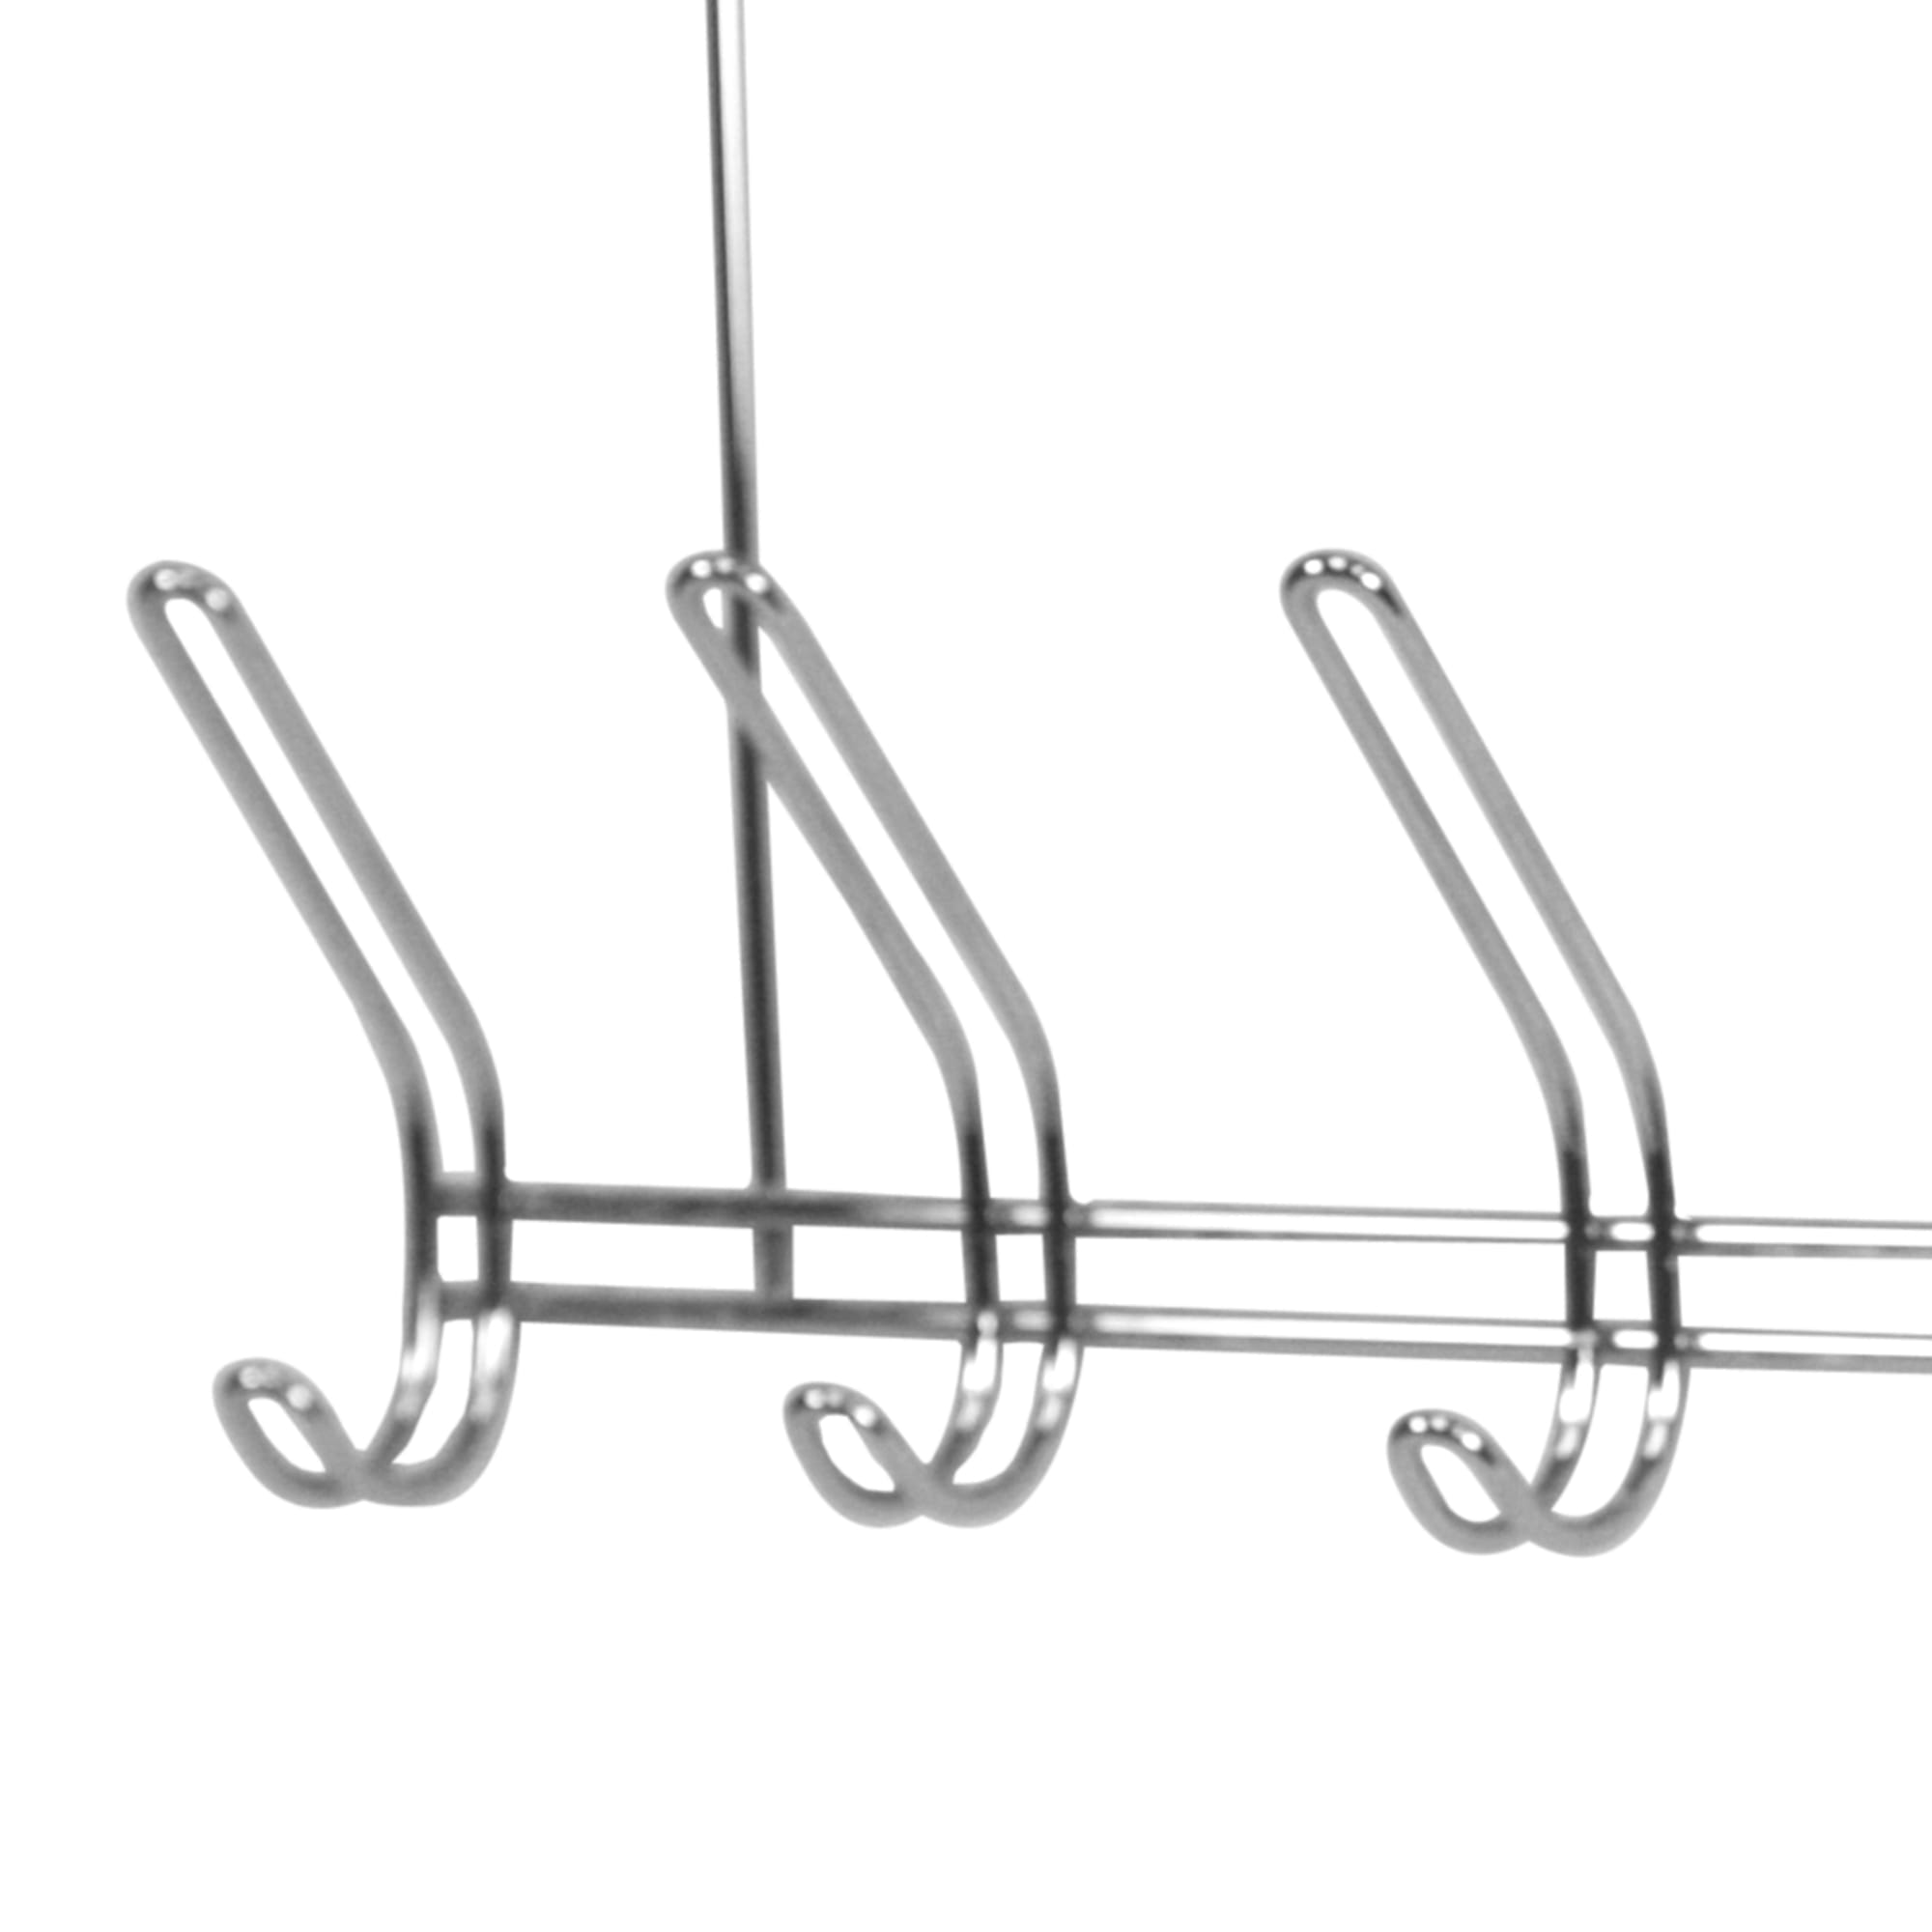 Home Basics 6 Dual Hook Over the Door Chrome Plated Steel Hanging Rack $6.00 EACH, CASE PACK OF 8